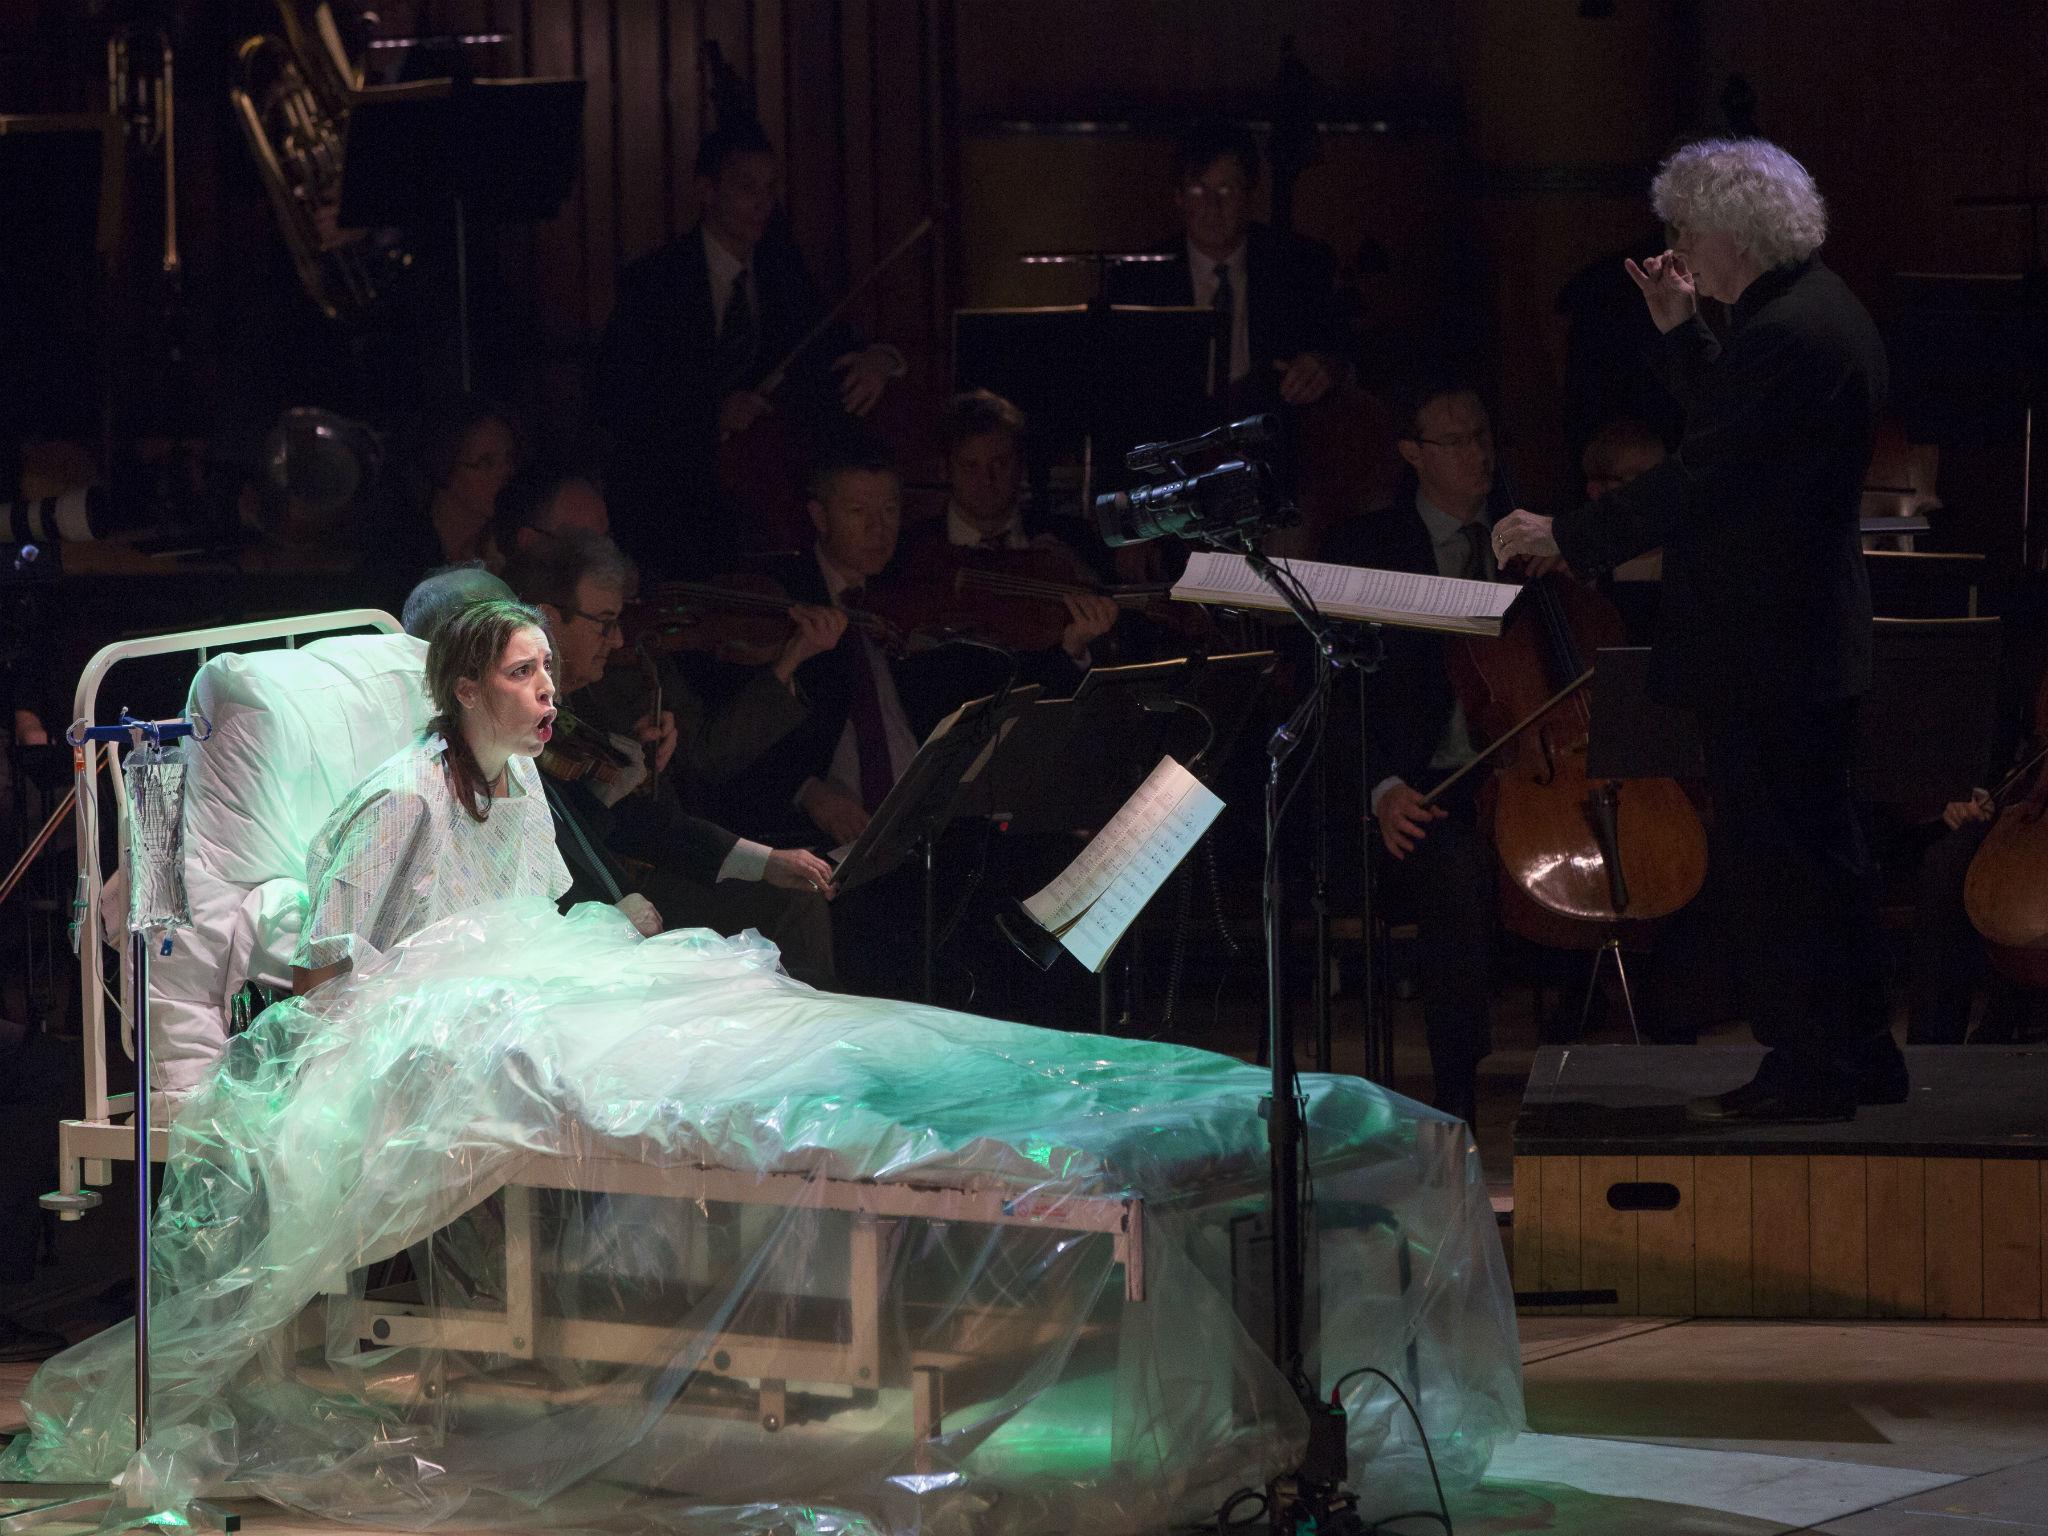 Audrey Luna as Gepopo in Ligeti’s ‘anti-anti-opera’, with Simon Rattle conducting the London Symphony Orchestra in the background